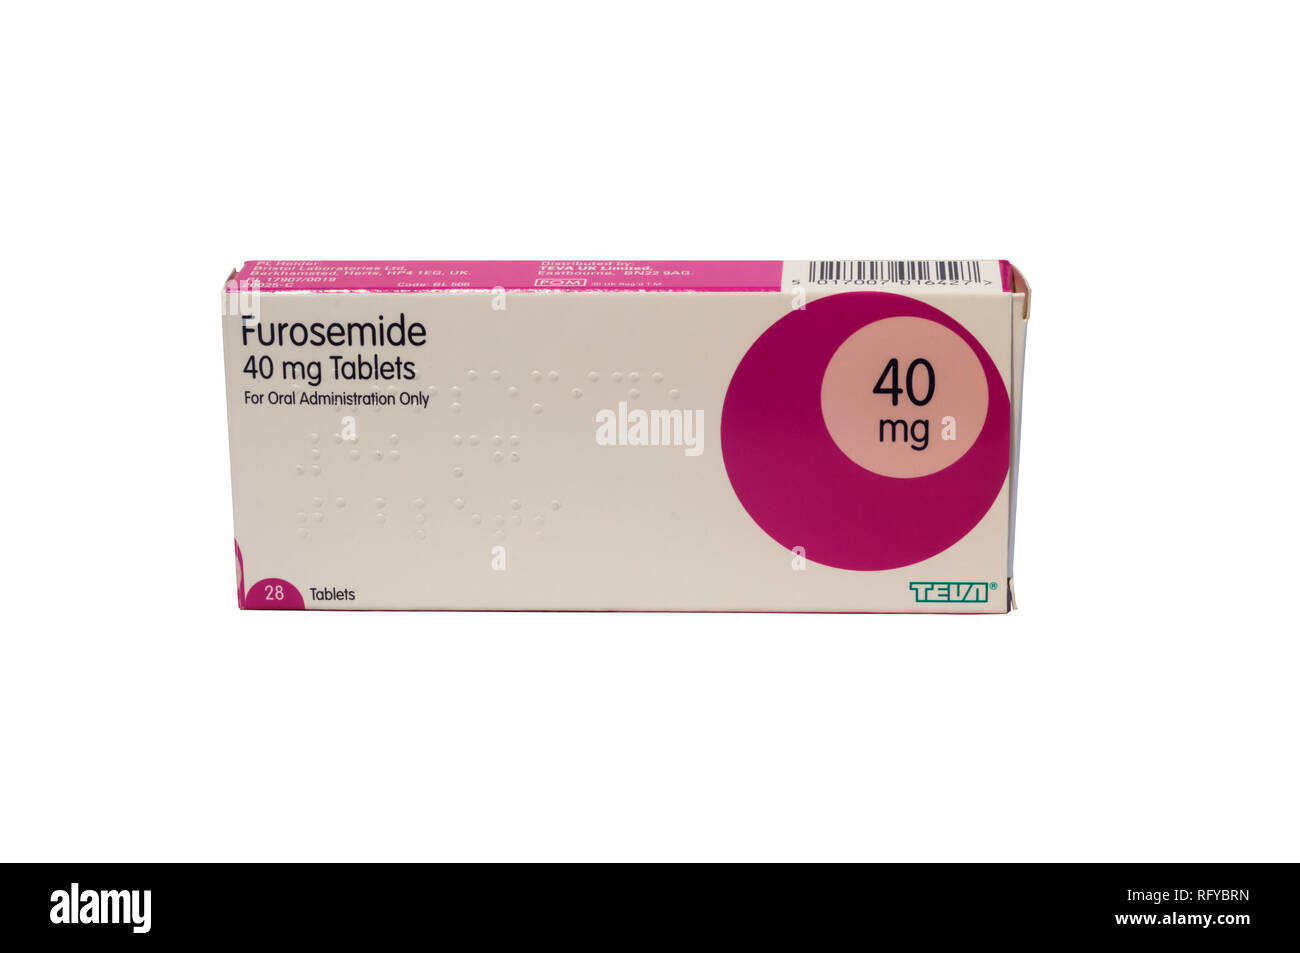 Furosemide High Resolution Stock Photography and Images - Alamy